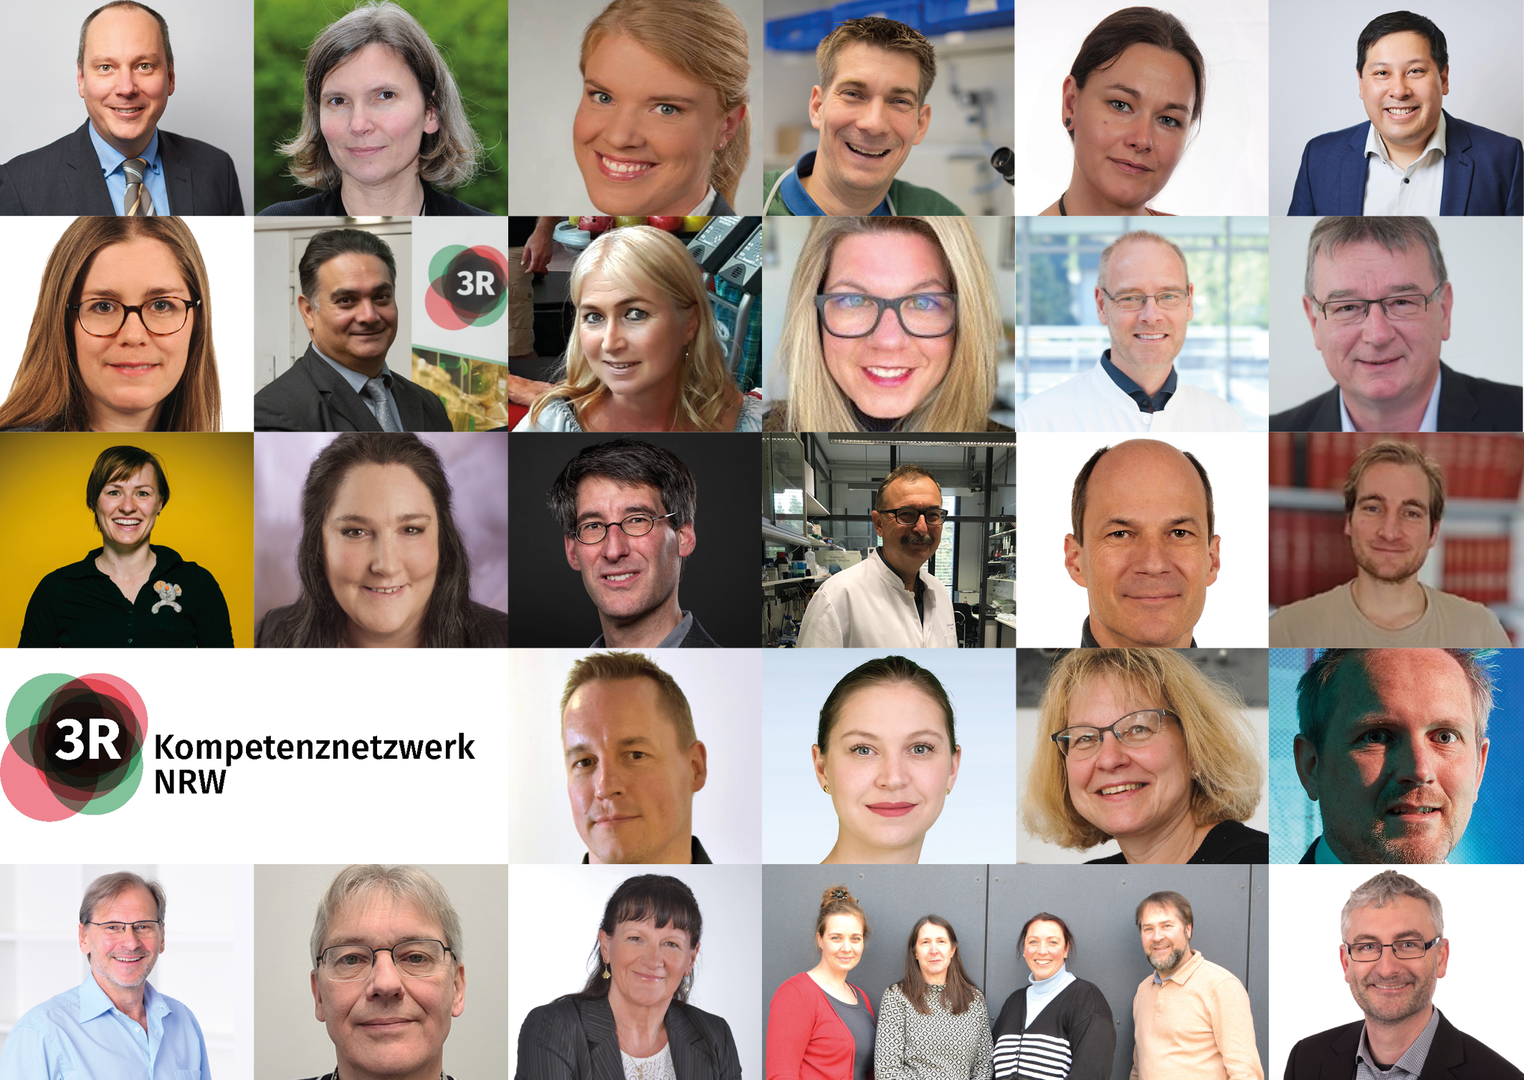 Photo collage showing researchers and other members of the 3R Competence Network NRW produced on the occasion of World Day for Laboratory Animals.